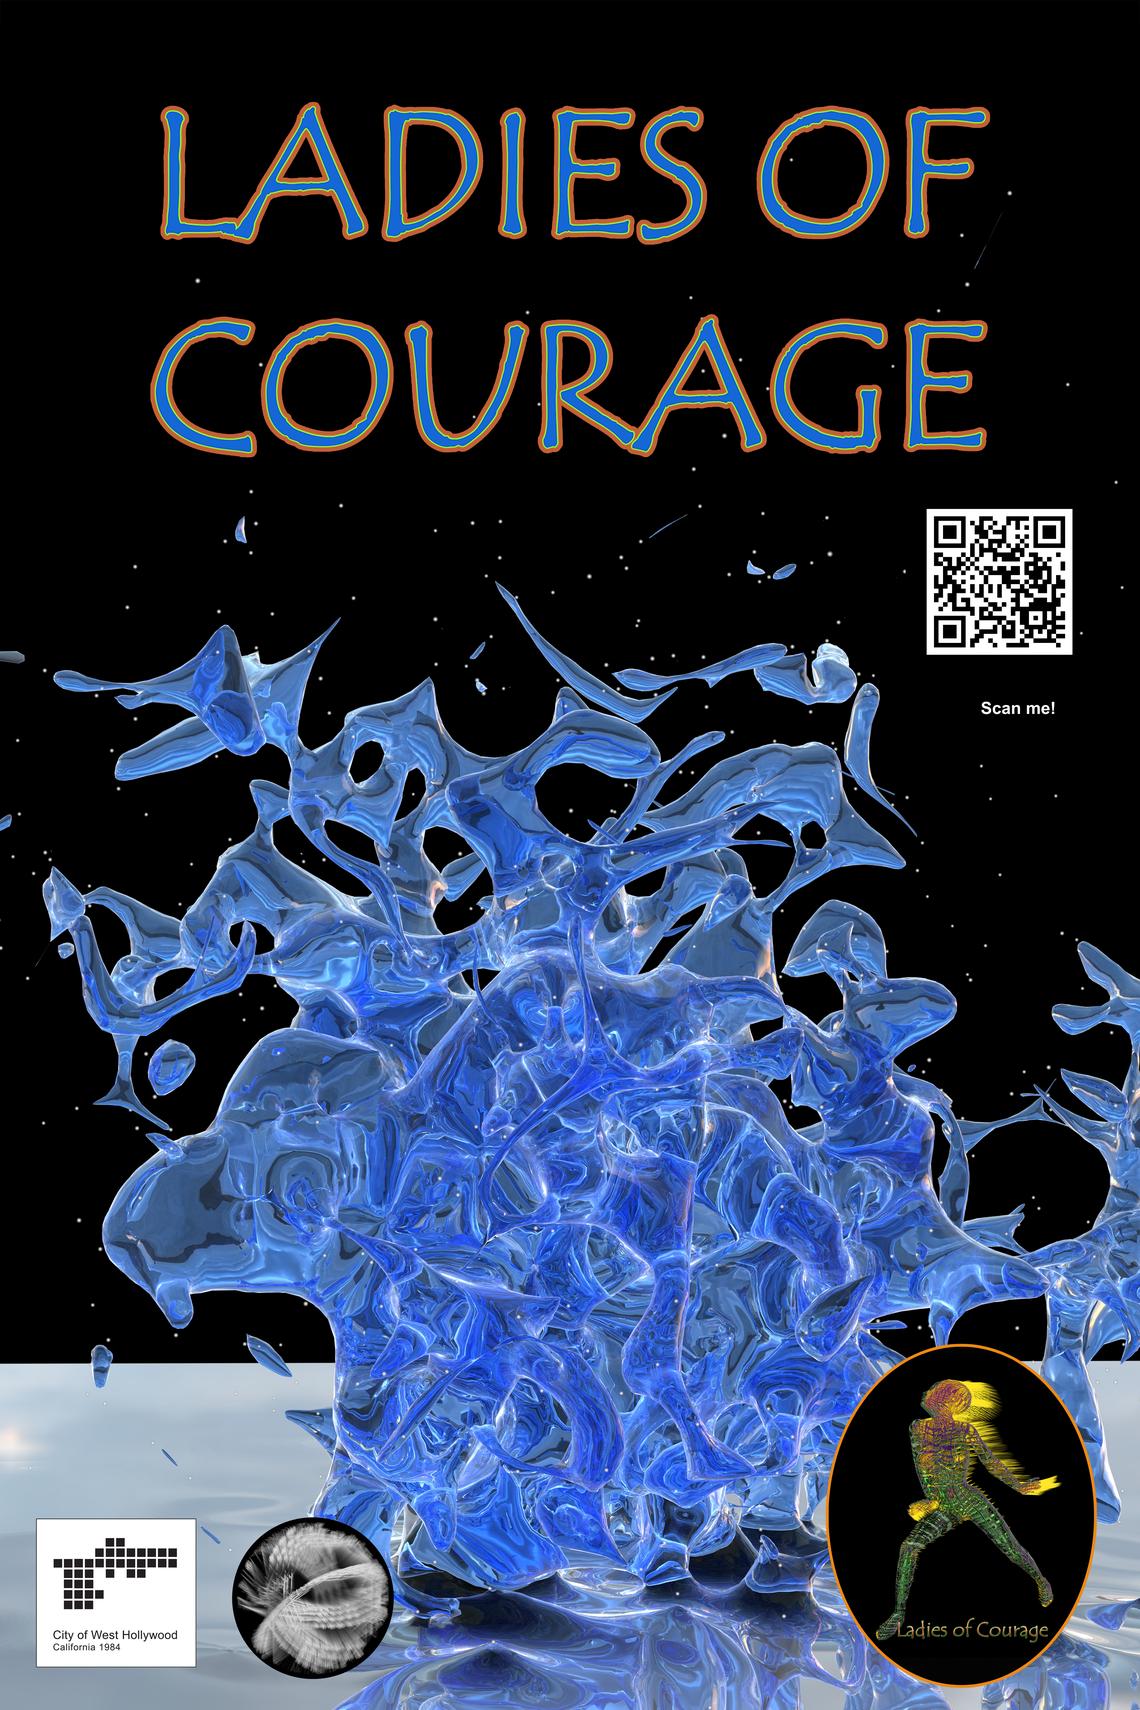 Banner for Ladies of Courage by Audri Phillips